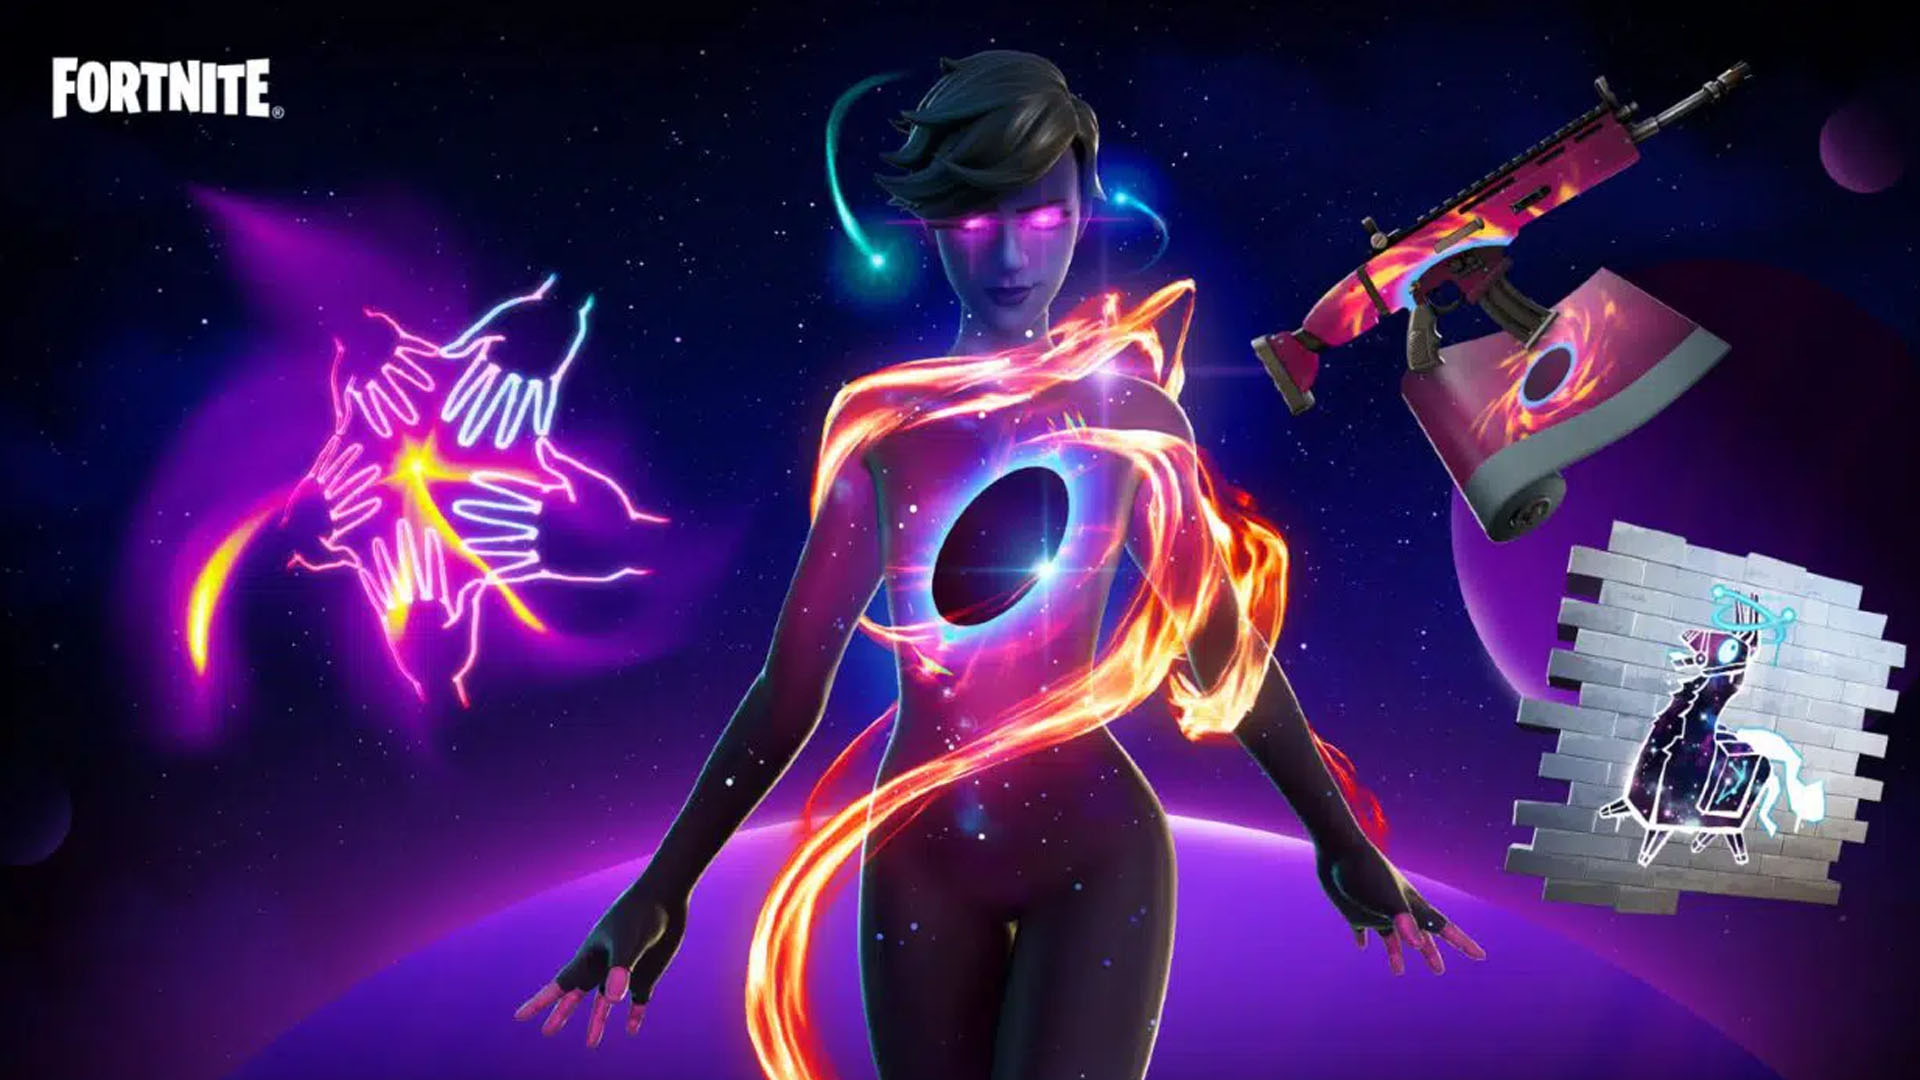 How to get Fortnite’s Galaxy Grappler skin early